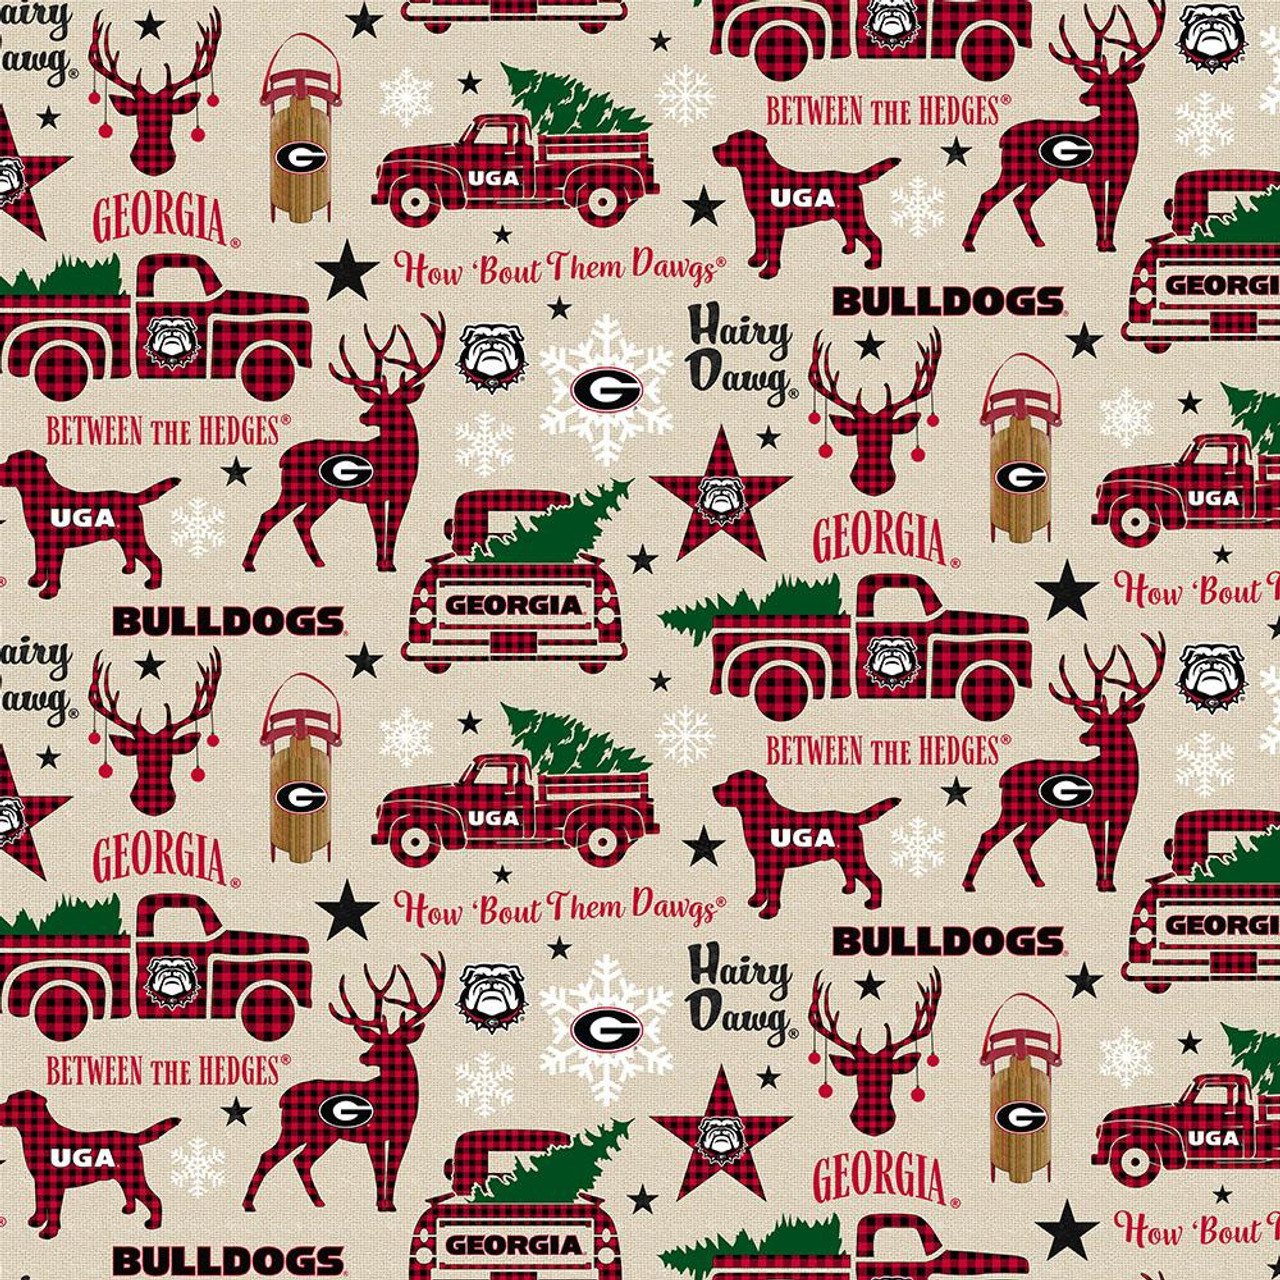 University of Georgia Bulldogs Cotton Fabric with Christmas Print and Matching Solid Cotton Fabrics